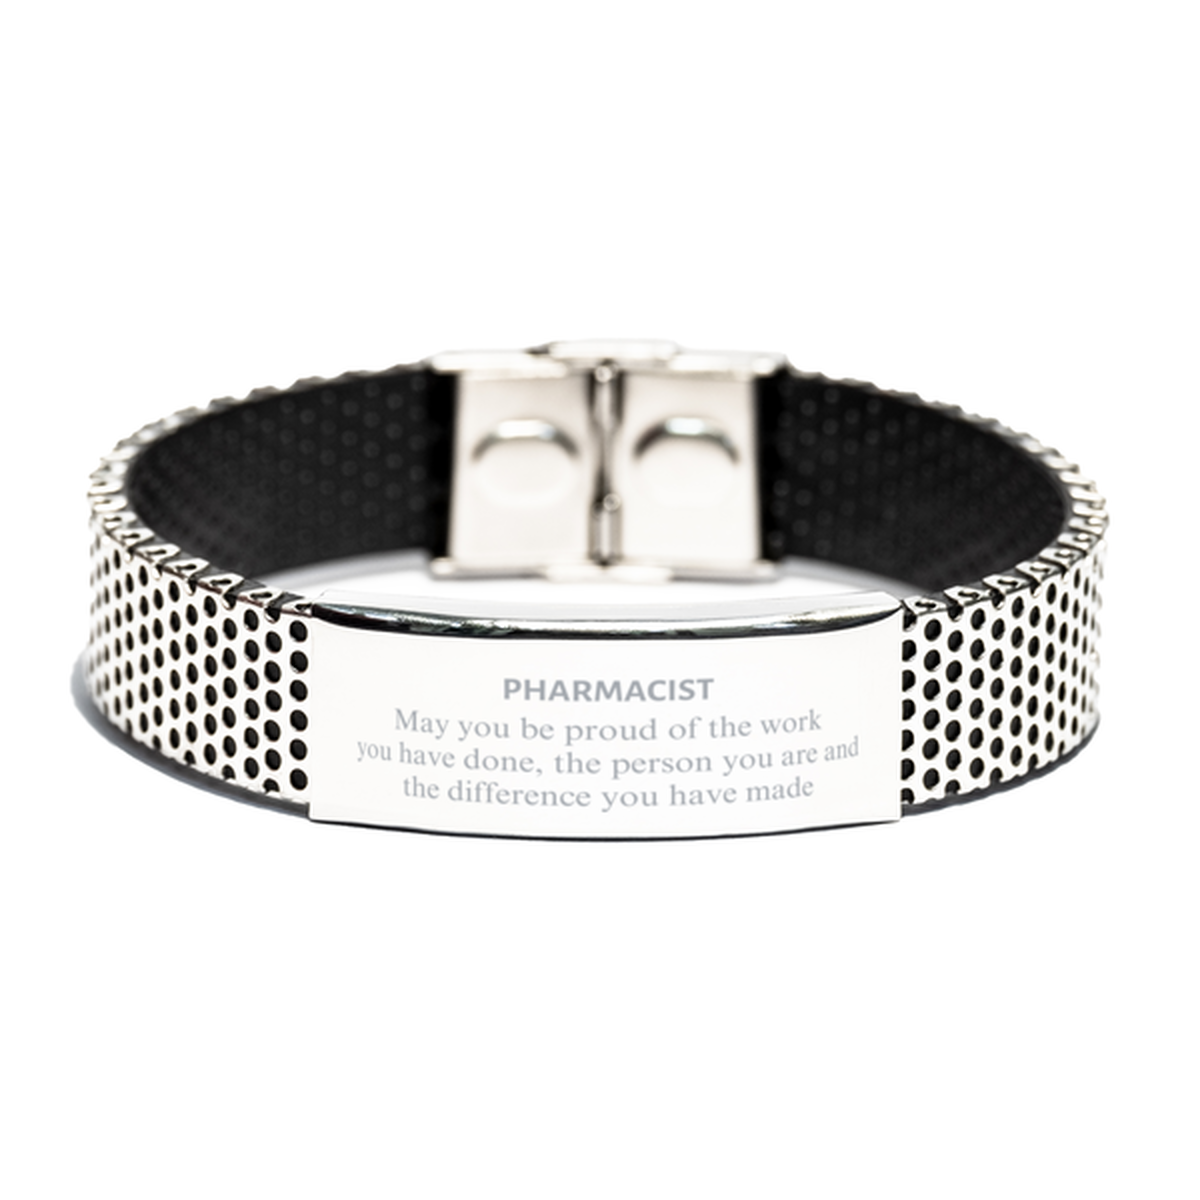 Pharmacist May you be proud of the work you have done, Retirement Pharmacist Stainless Steel Bracelet for Colleague Appreciation Gifts Amazing for Pharmacist